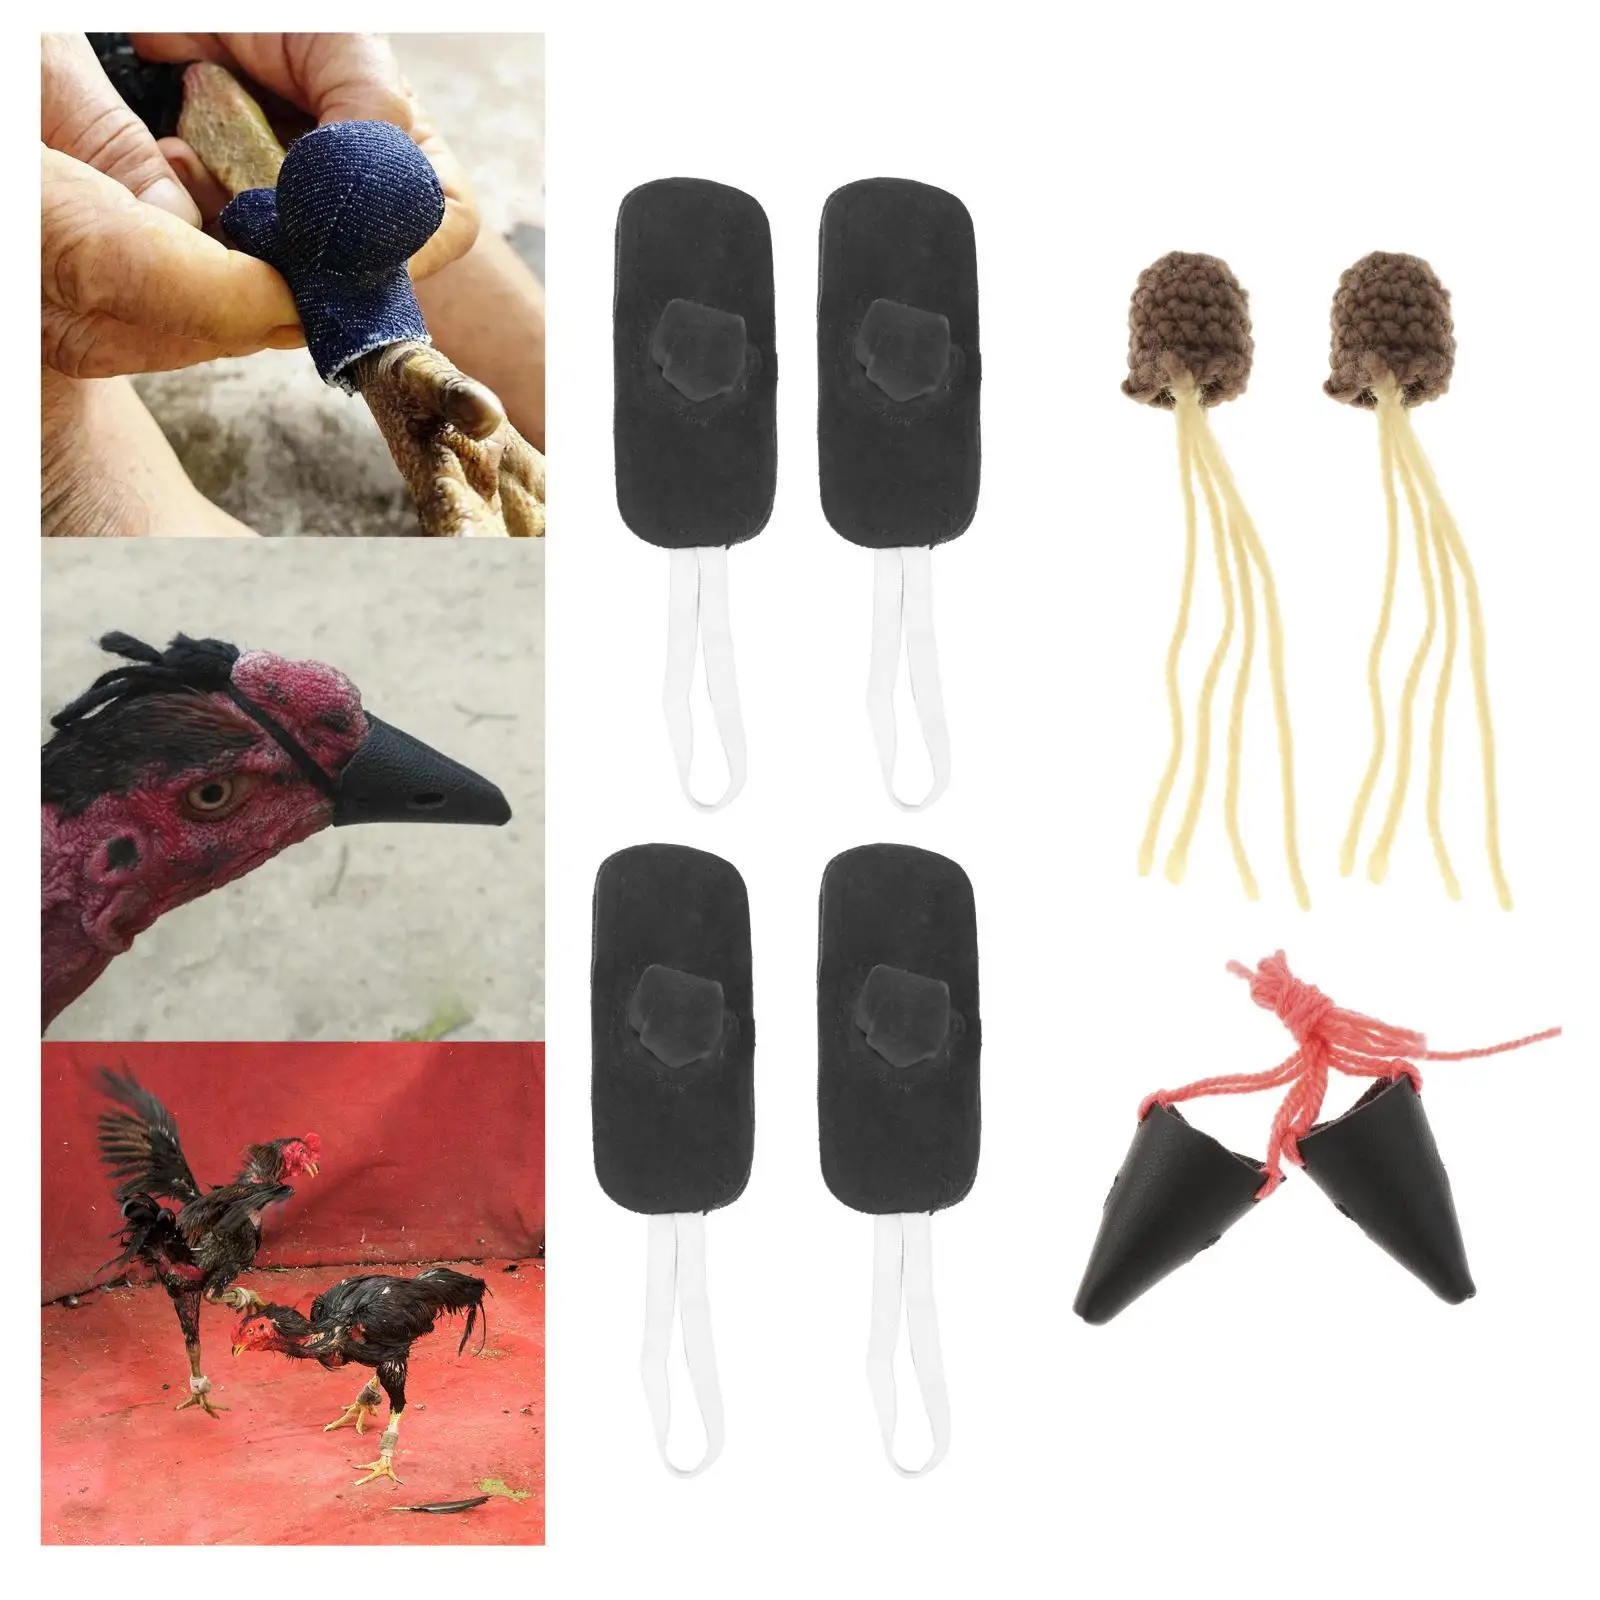  Fighting Foot Cover W/ Mouth Cover Accessories Animals Fighting Supplies Chicken Mitt Gamefowl Cockfighting Foot Cover